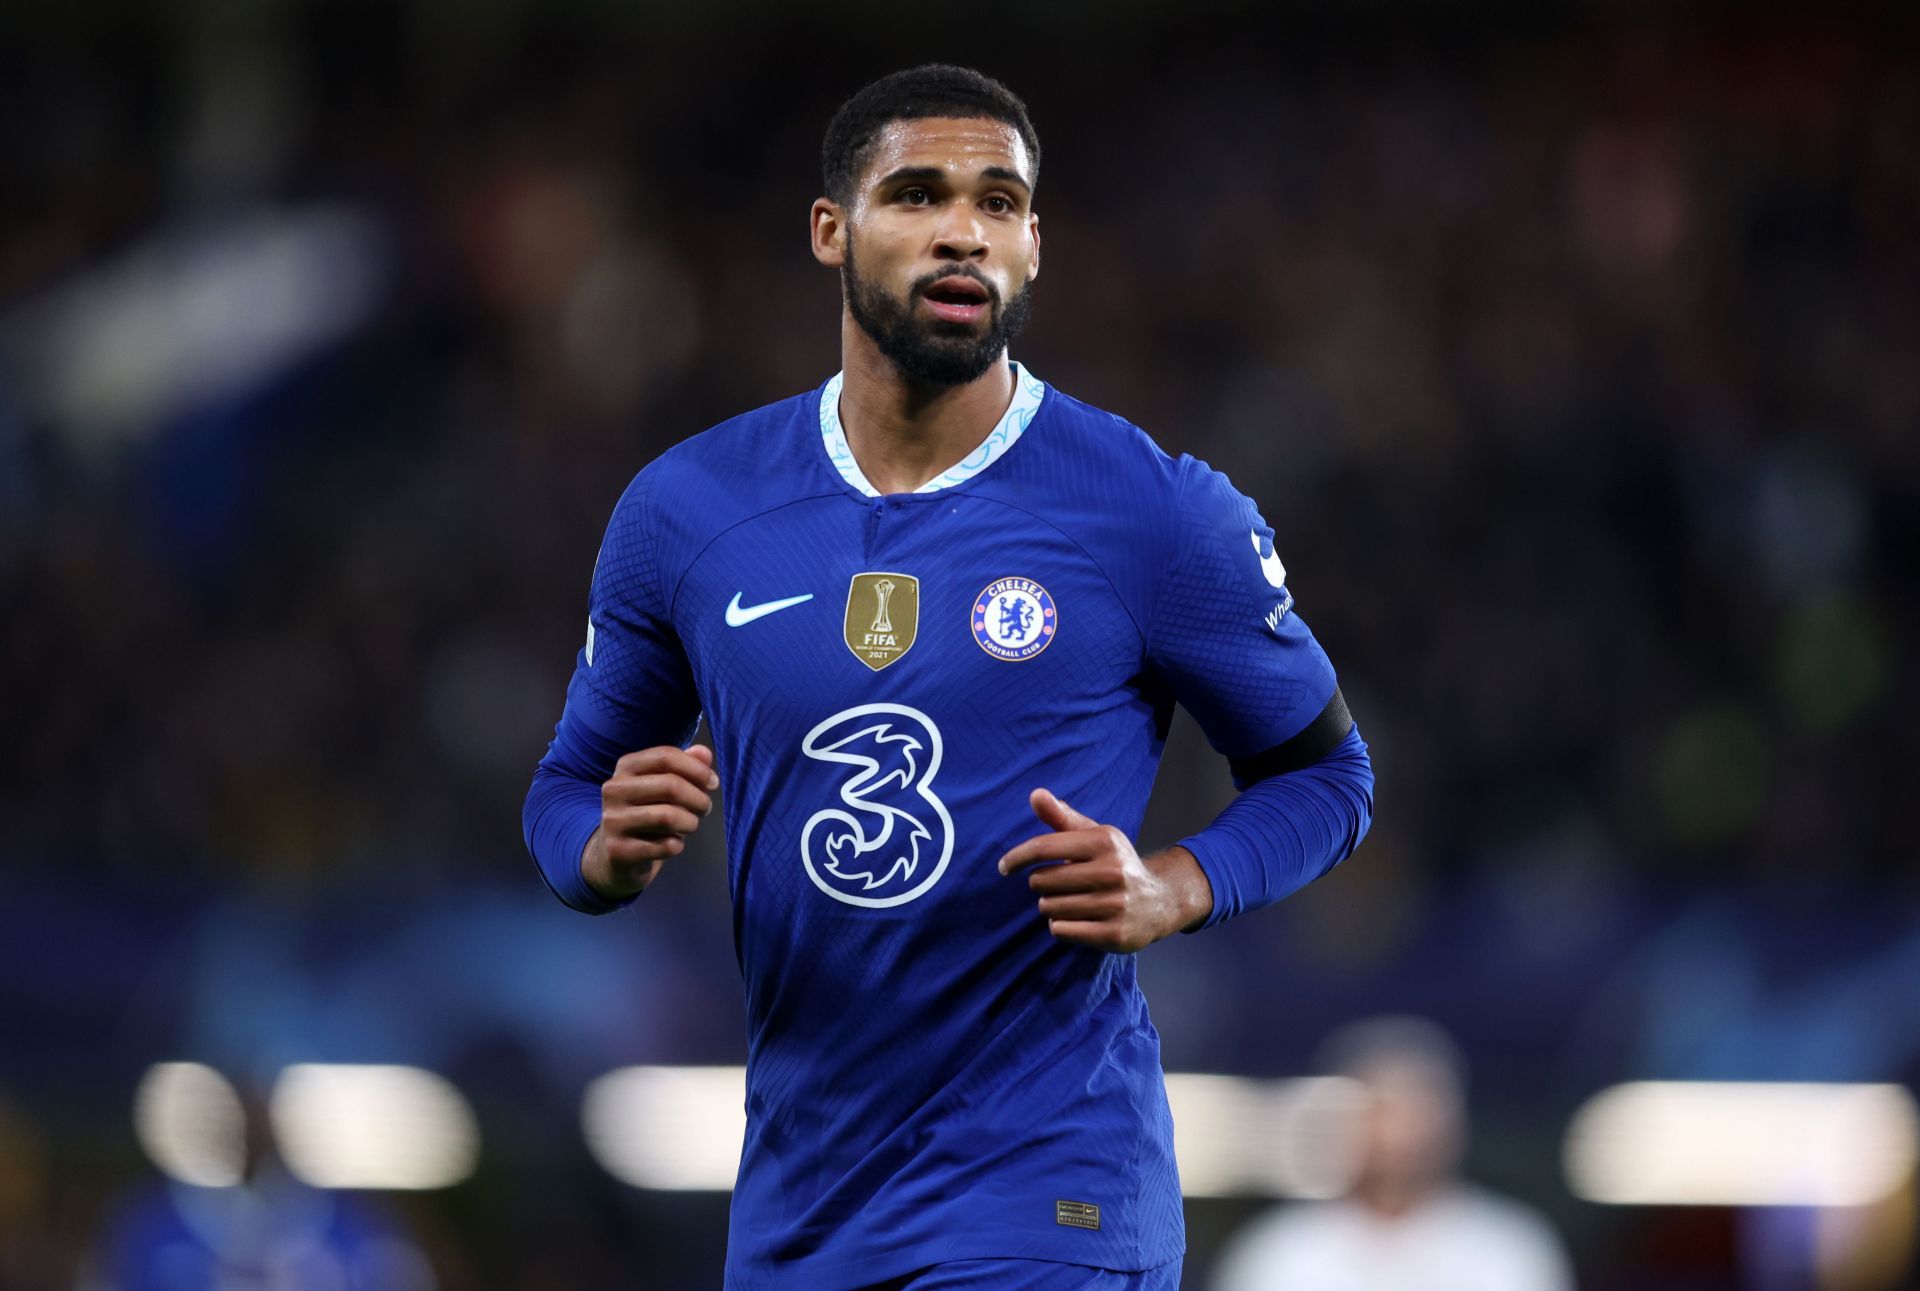 Loftus-Cheek is set to join former Premier League duo at Milan.